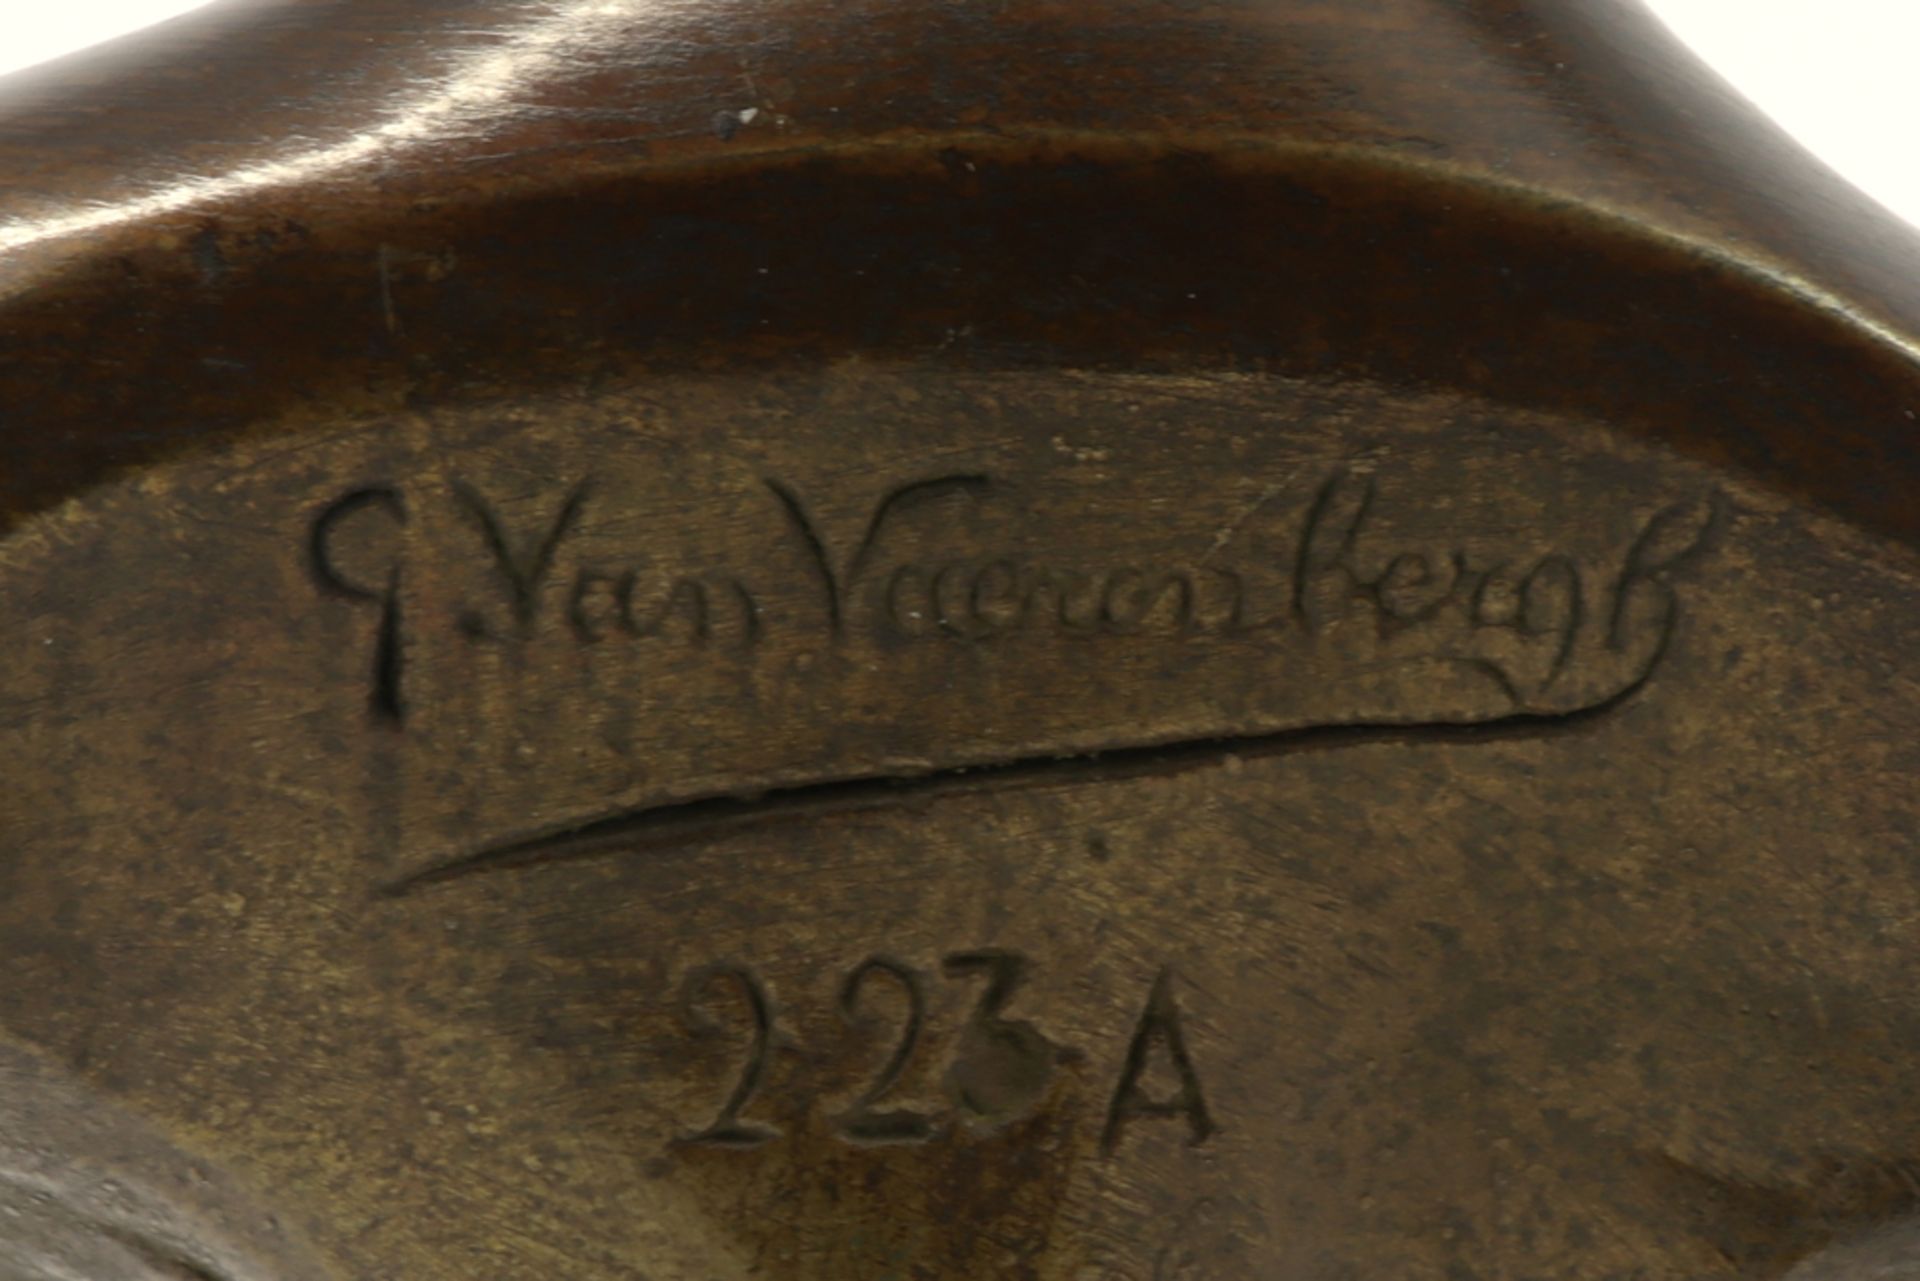 early 20th Cent. galvano-sculpture - signed Gustave Van Vaerenbergh and numbered||VAN VAERENBERGH - Image 4 of 4